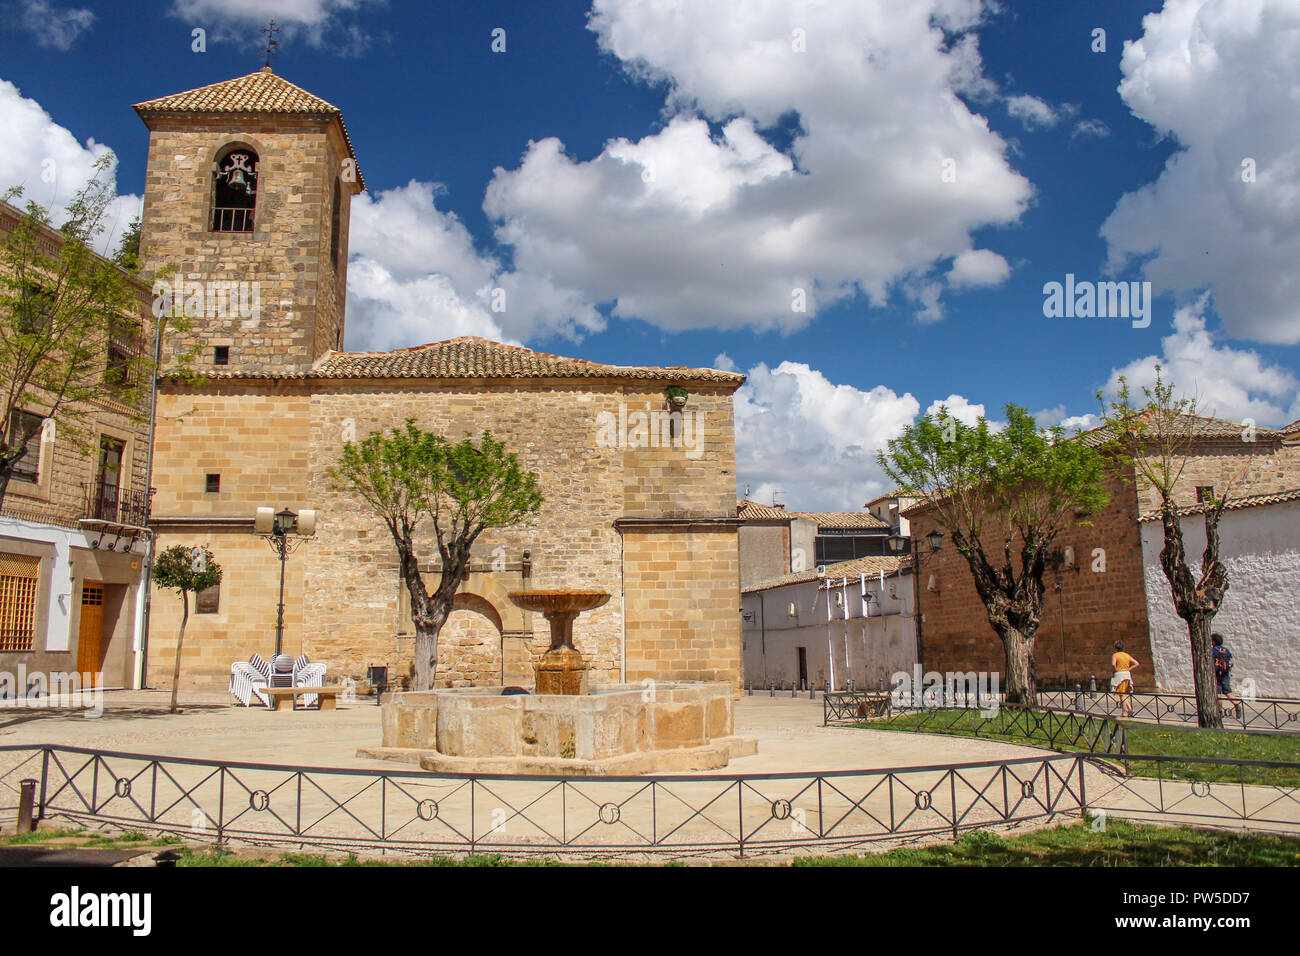 Courtyard in front of the Church of San Pedro (Iglesia de San Pedro) with a water fountain in the center, Ubeda, Spain Stock Photo